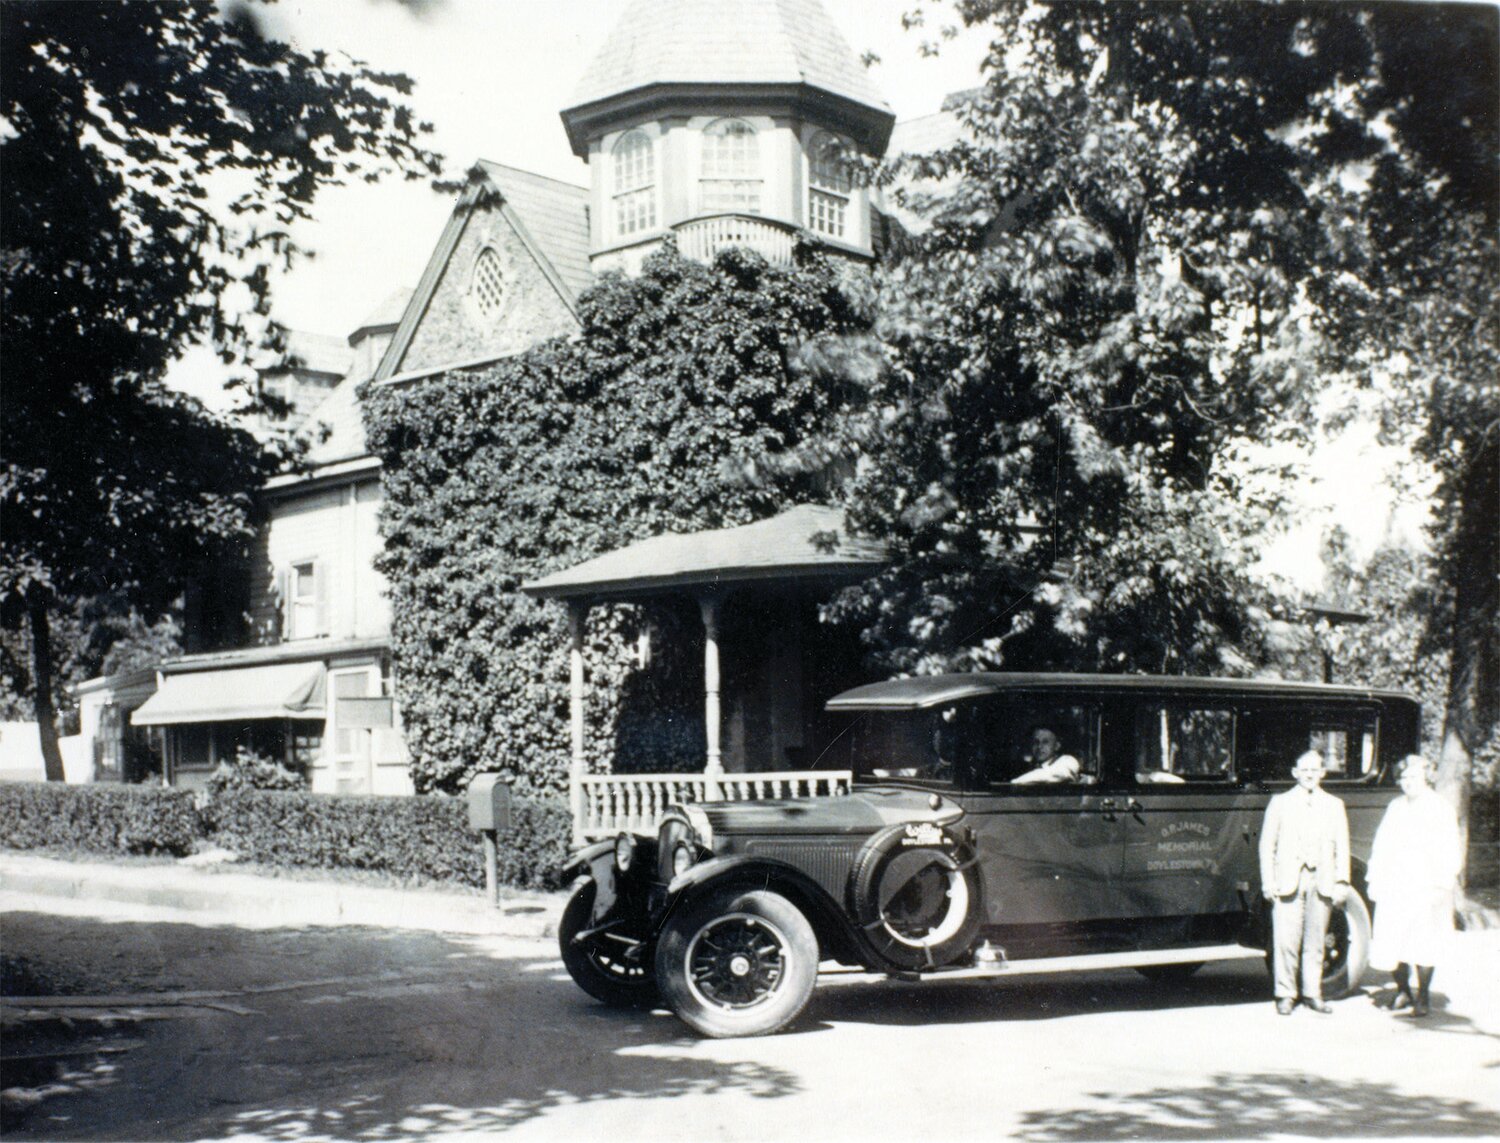 The First Doylestown Emergency Hospital opened in 1923.